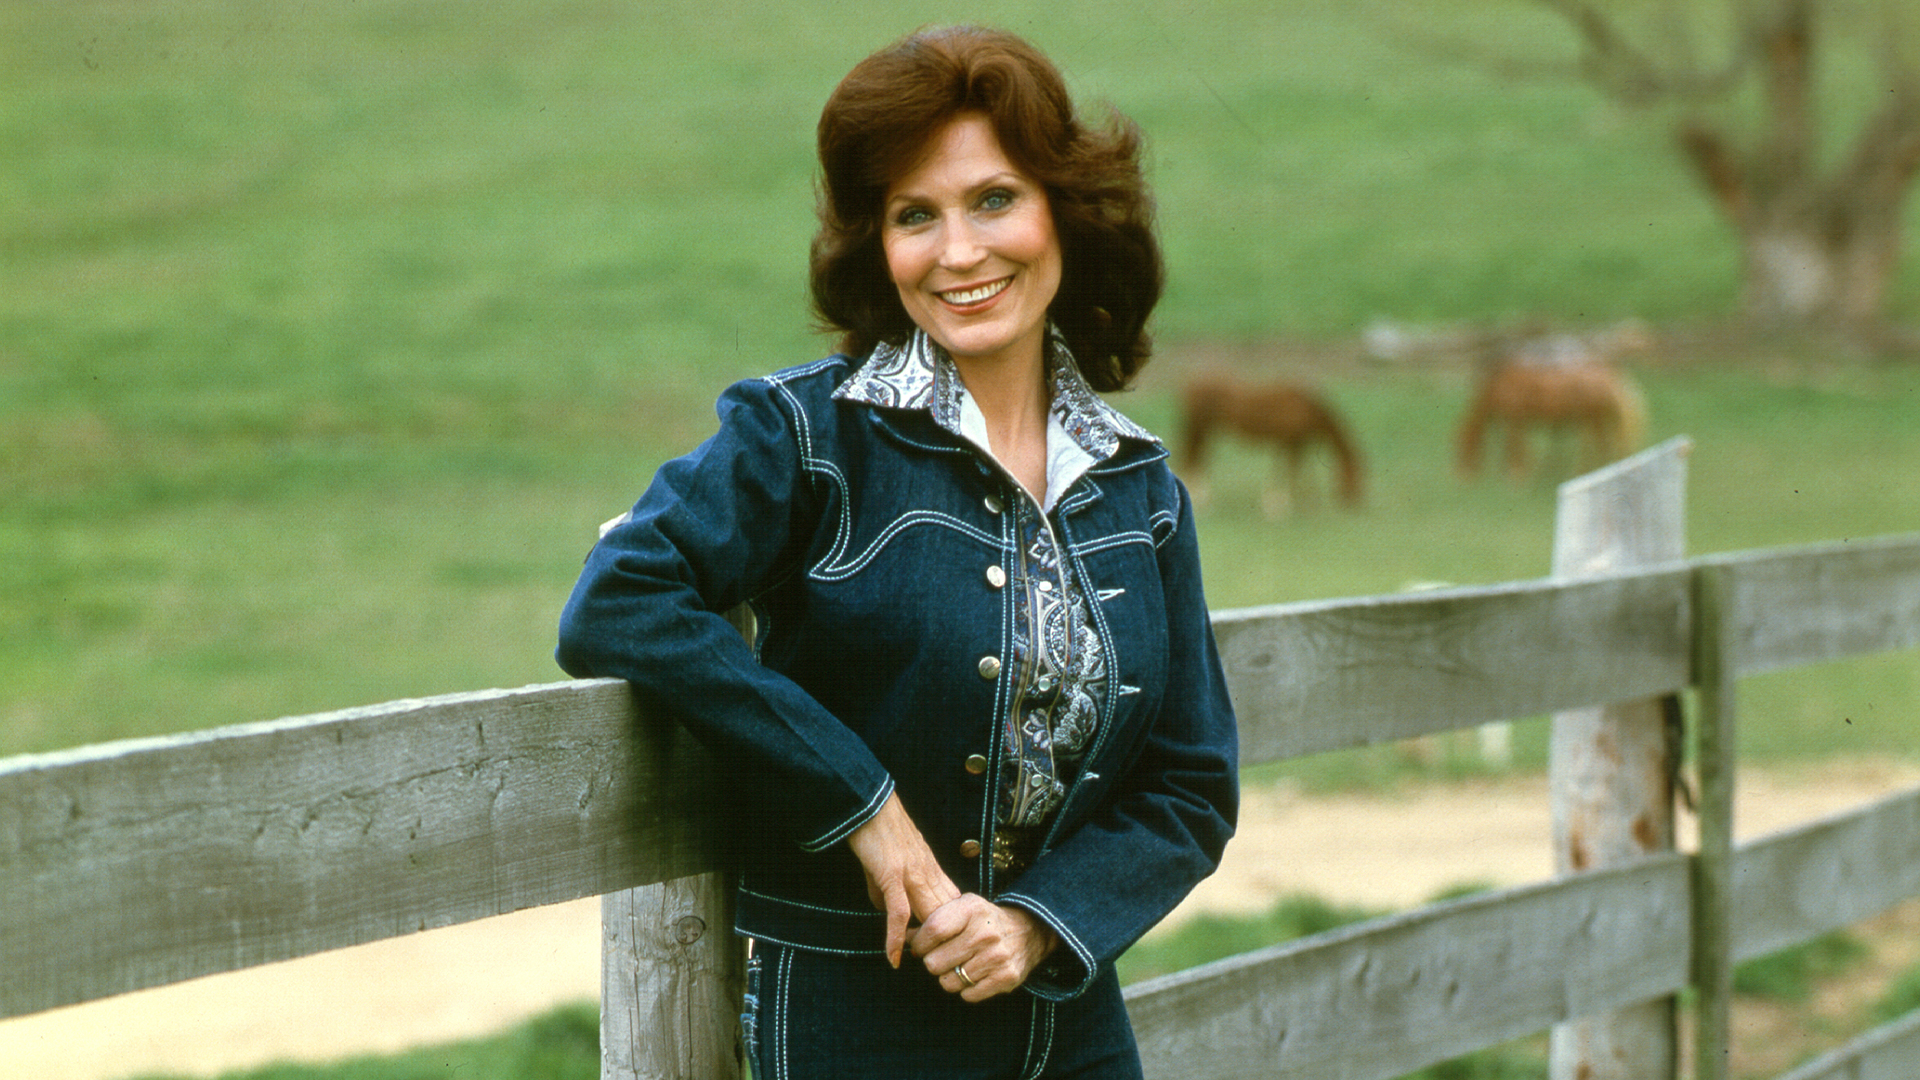 June 19, 2008: Country Music Legend Loretta Lynn Was Inducted Into the Songwriters Hall of Fame